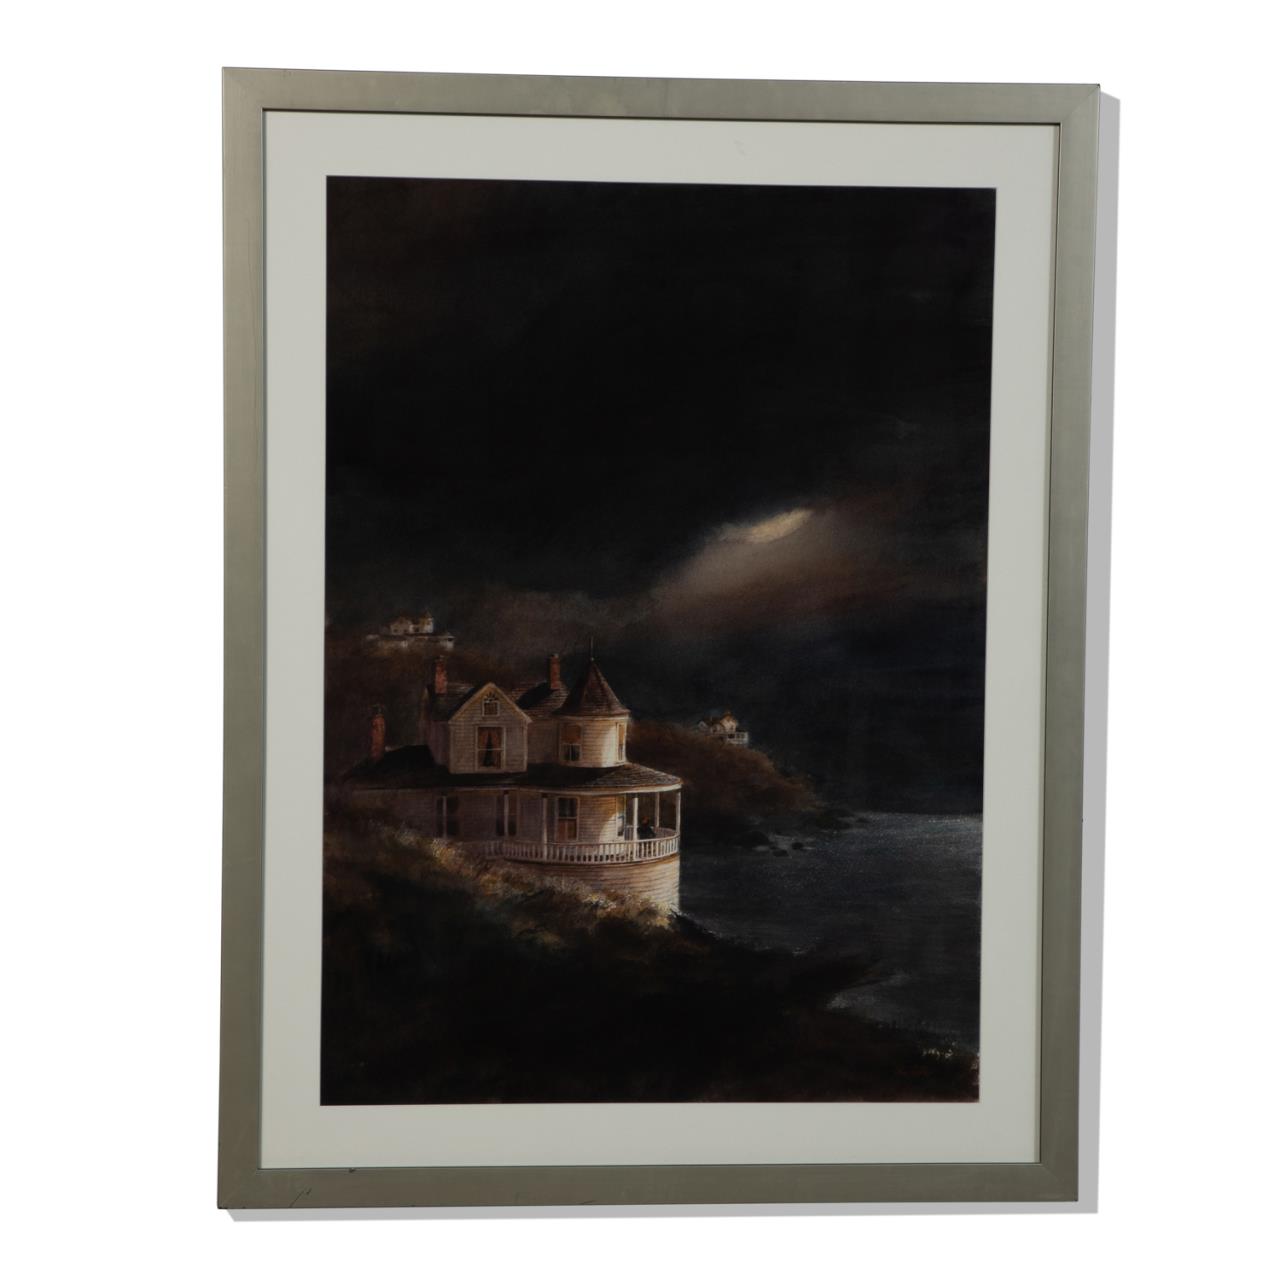 J. GABLE, WC ON PAPER "STORM AT